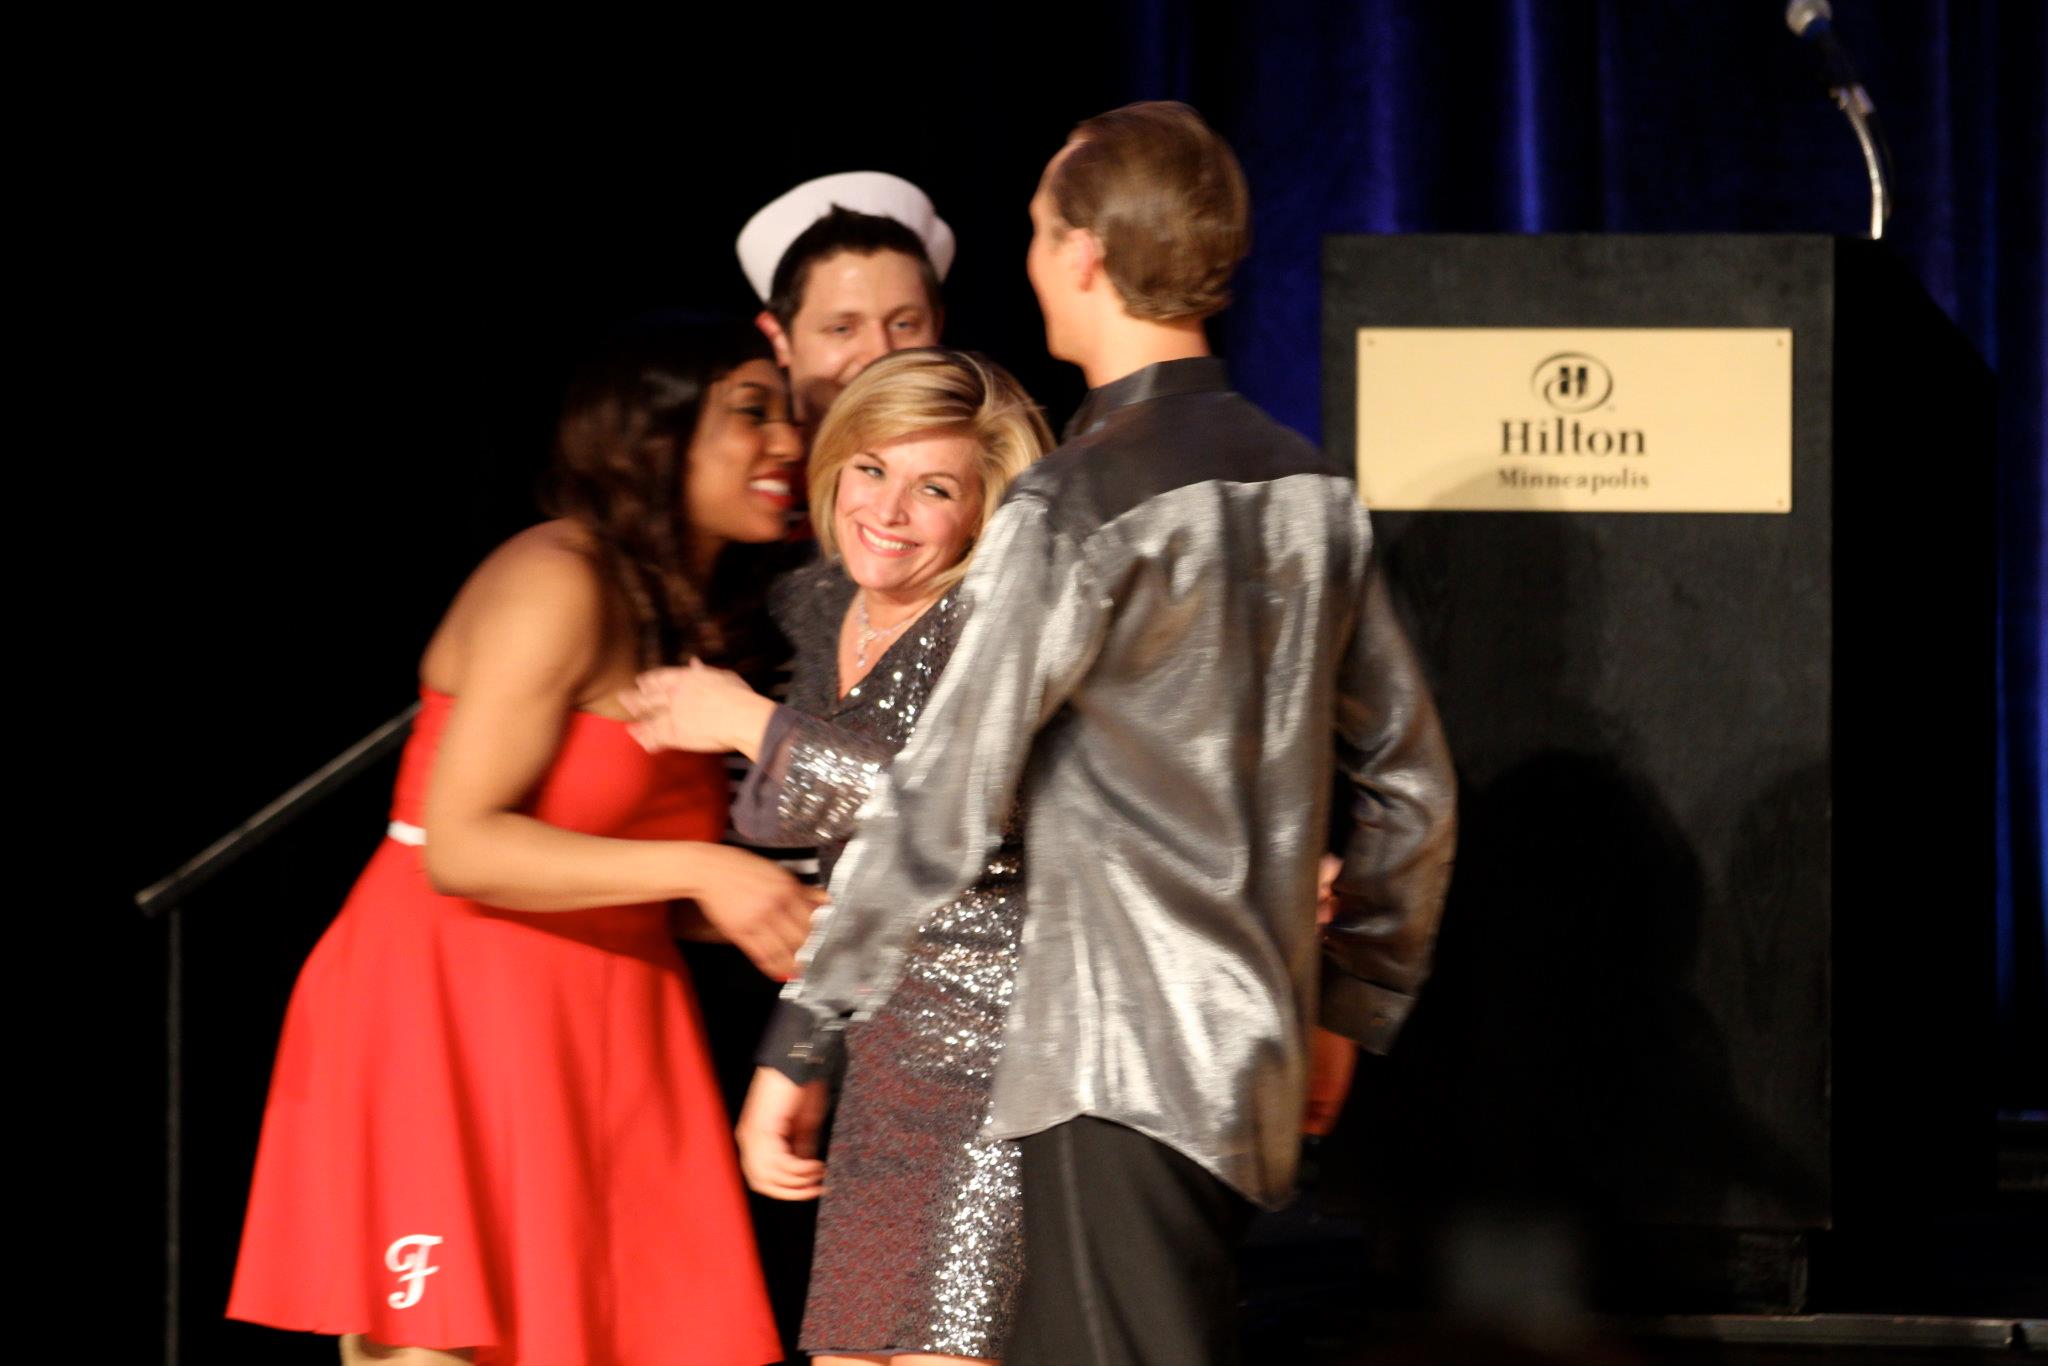 Christine Clayburg wins Dancing with the Twin Cities Celebrities 2012